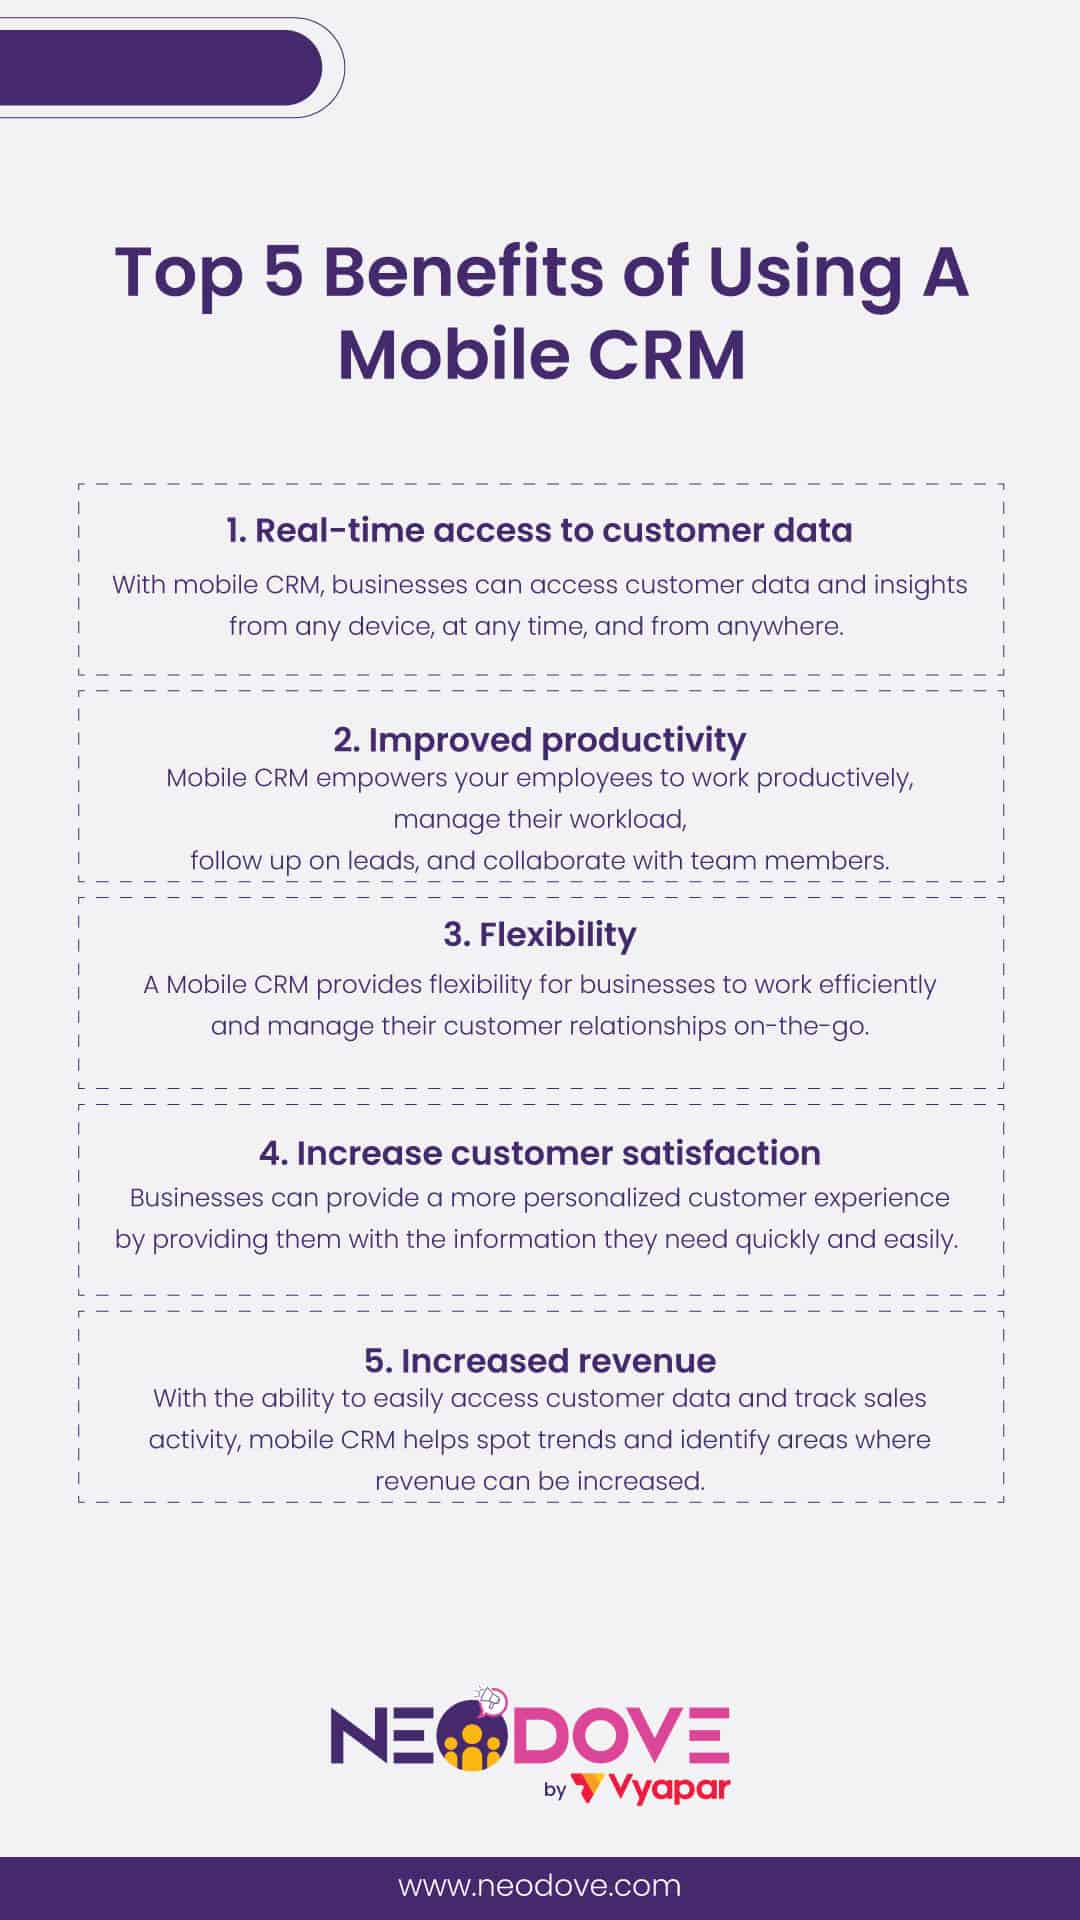 Top 5 Benefits of Using A Mobile CRM - NeoDove